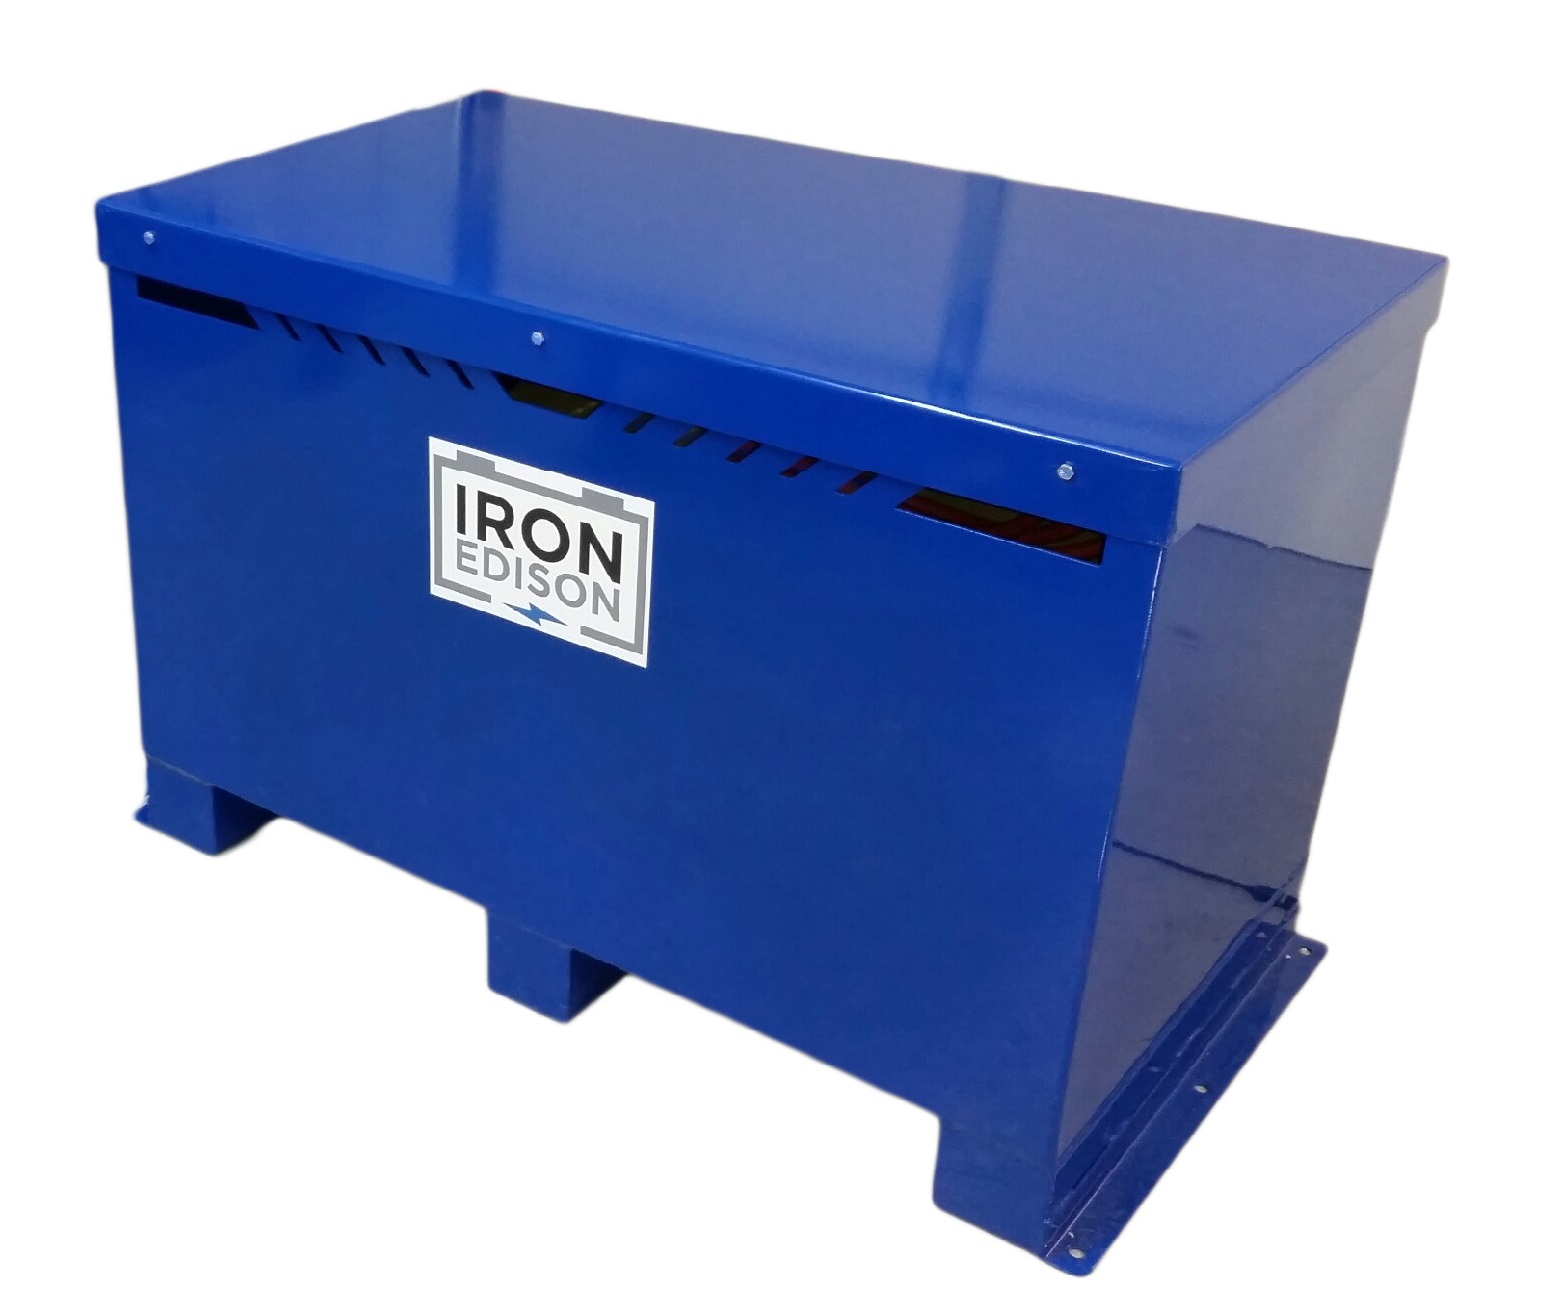 All Lithium Iron batteries come in an NEC-compliant steel enclosure